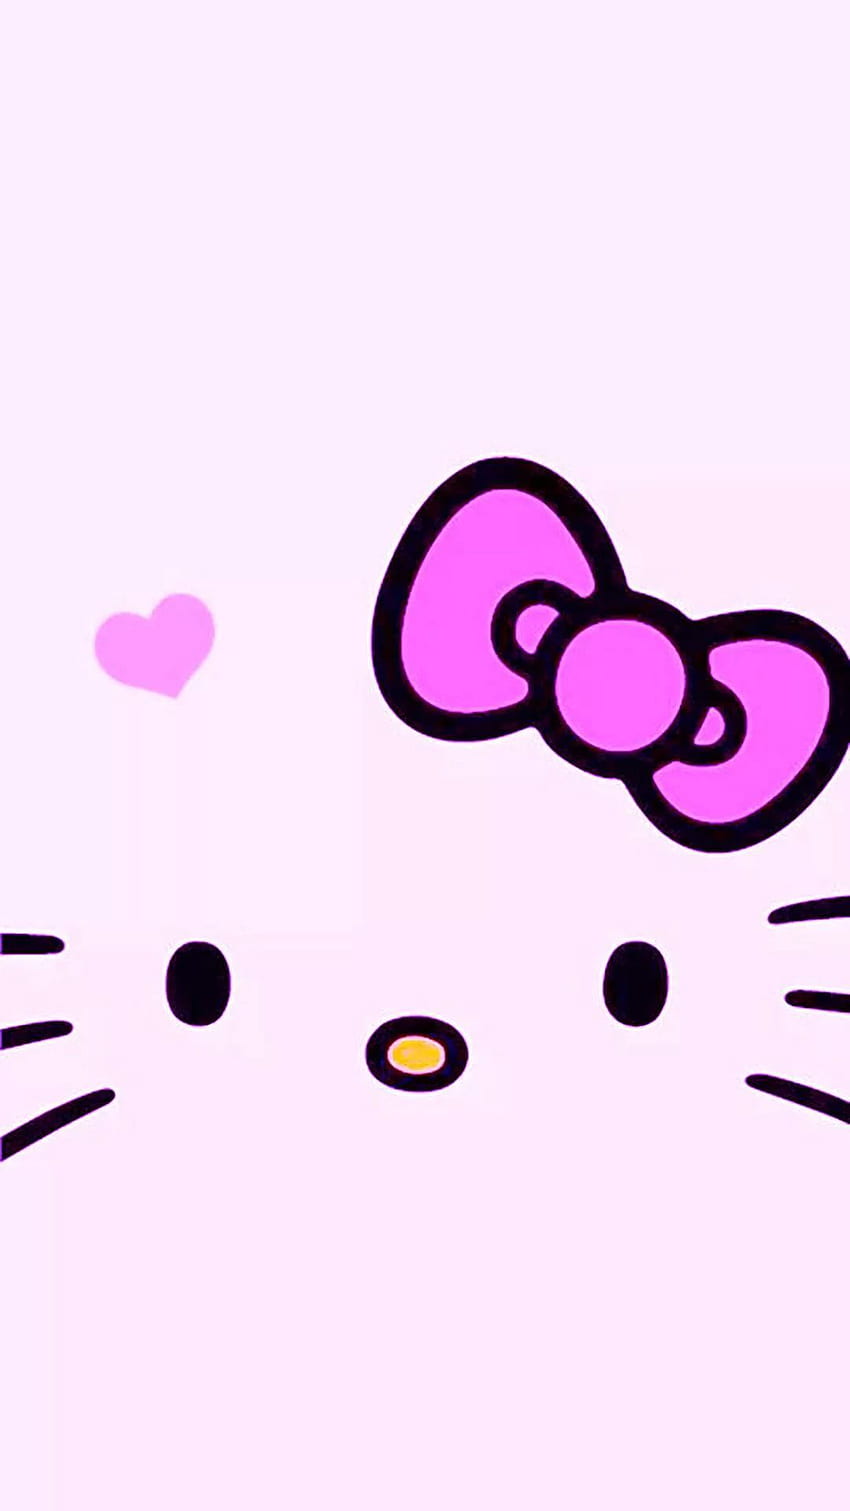 20 Cute Hello Kitty Wallpaper Ideas  Soft Pink Background  Idea Wallpapers   iPhone WallpapersColor Schemes